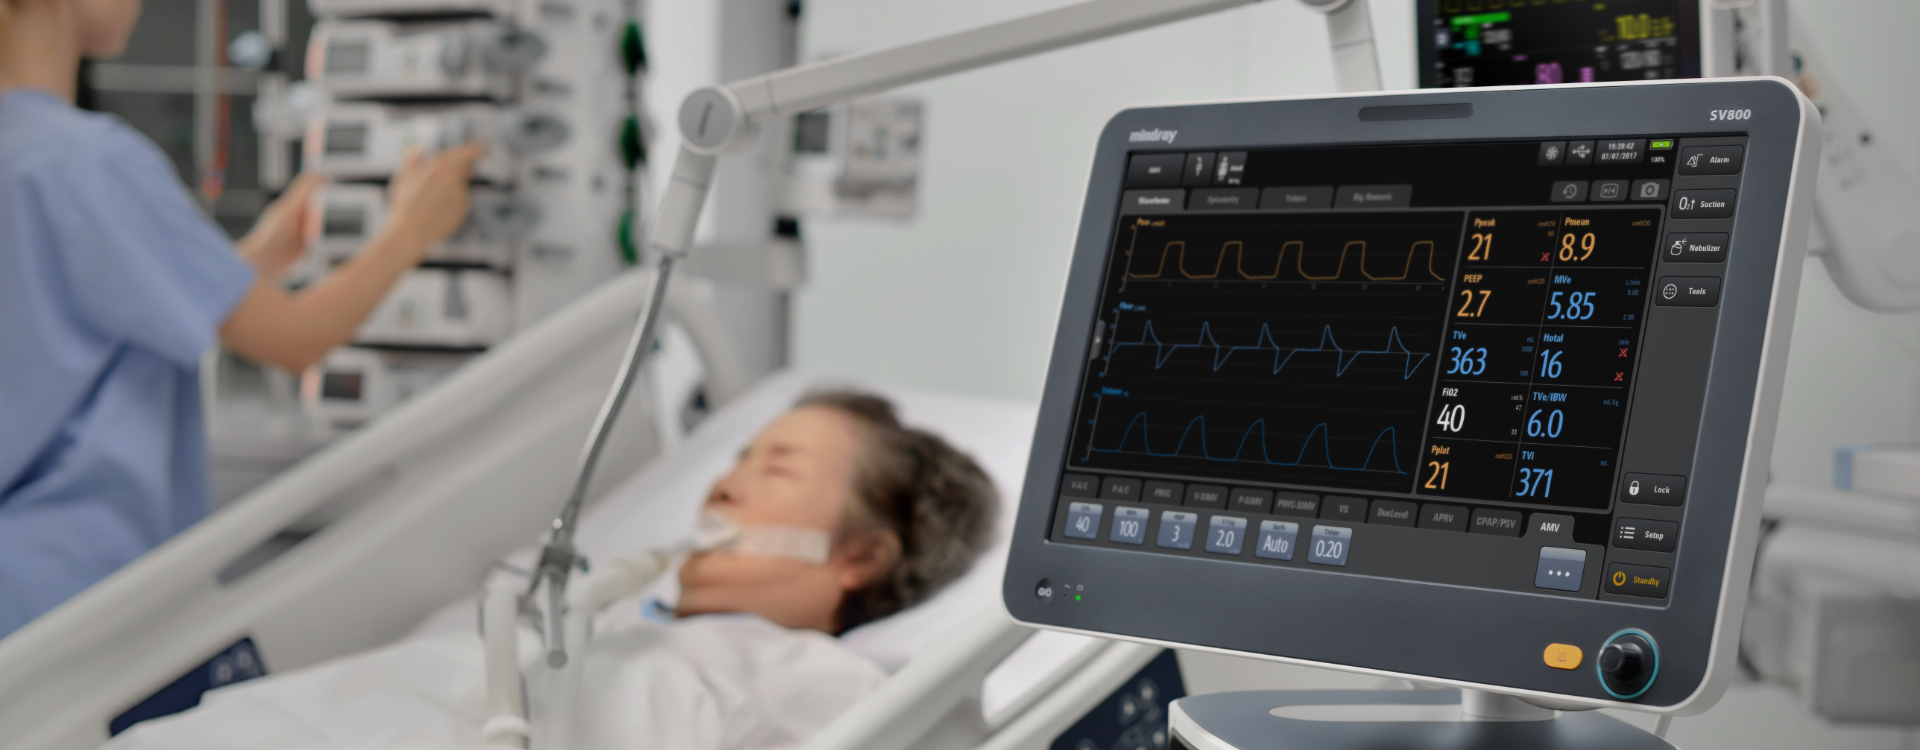 What Are Signs of Improvement for Ventilator Patient